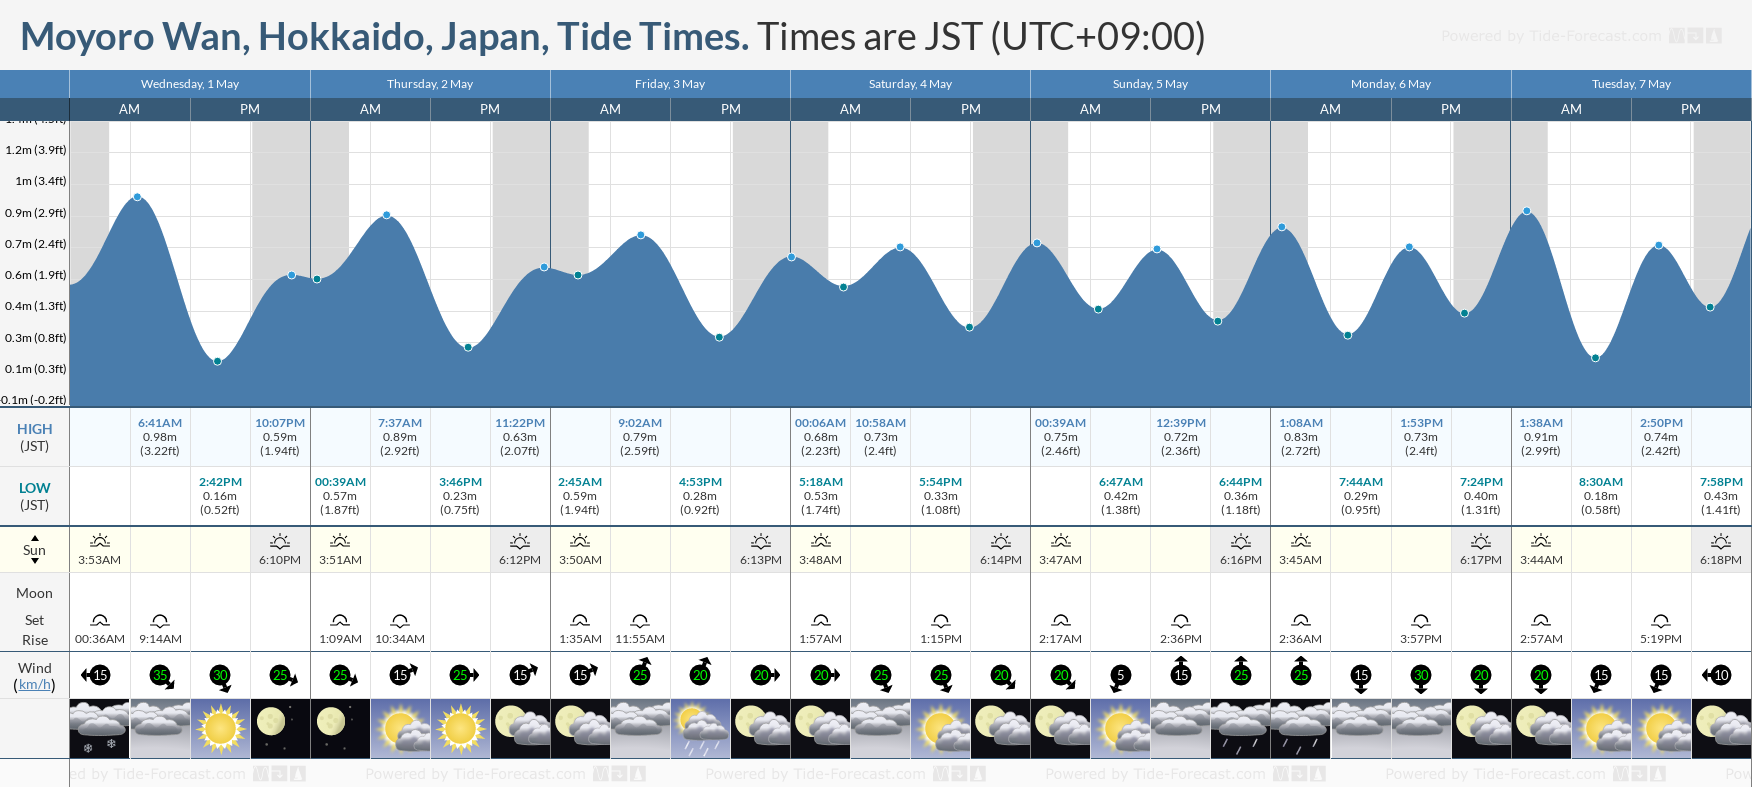 Moyoro Wan, Hokkaido, Japan Tide Chart including high and low tide tide times for the next 7 days